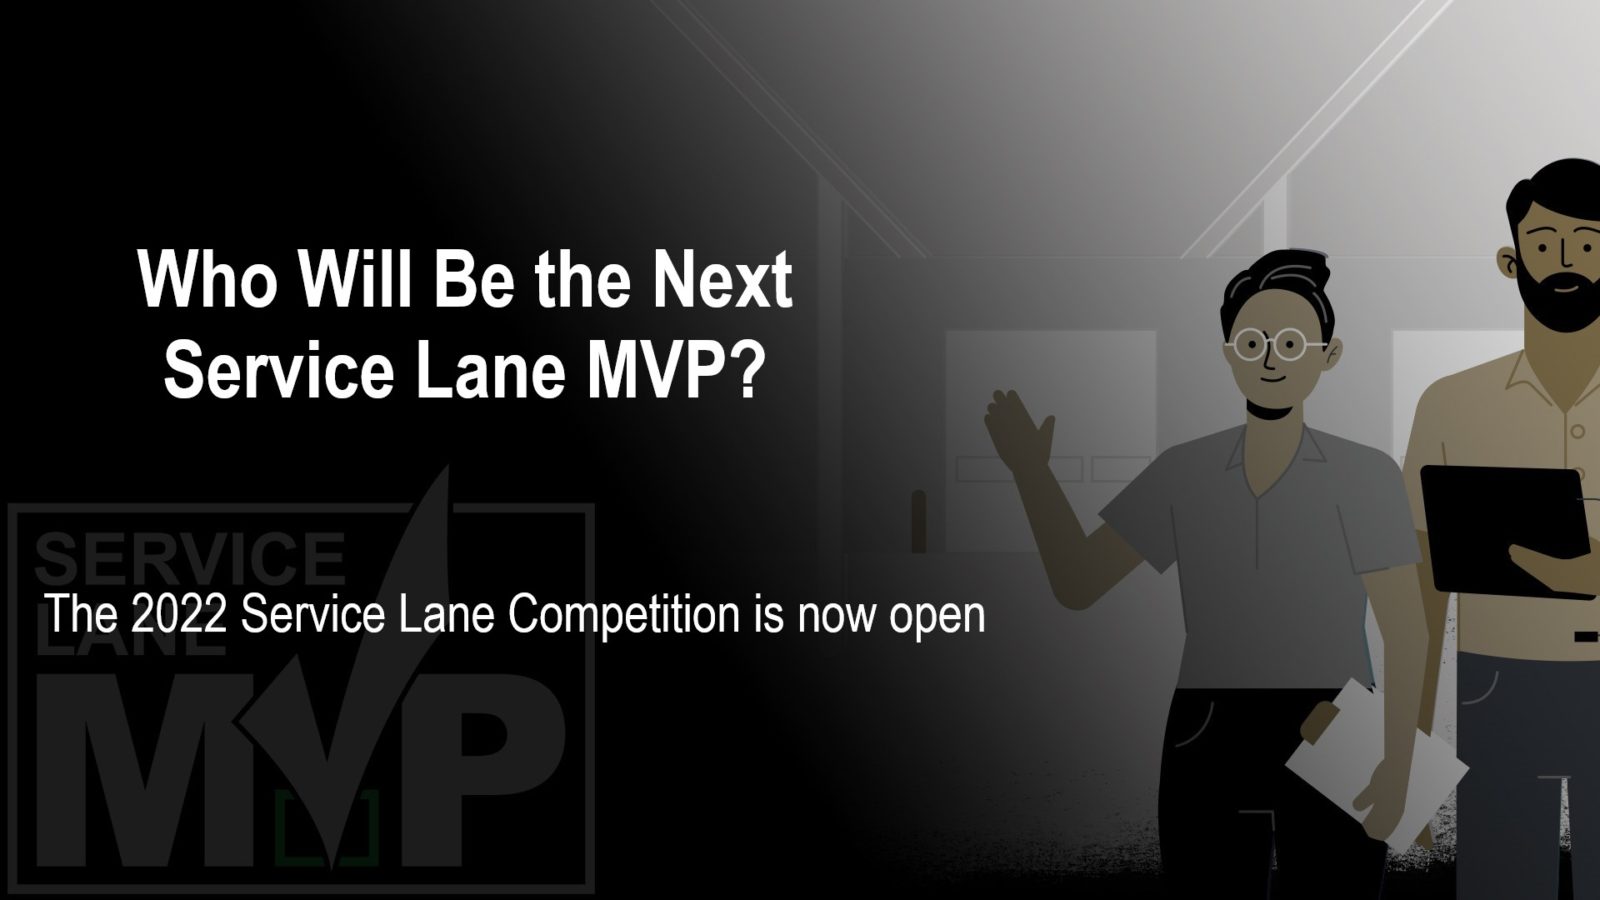 Are You the Next Service Lane MVP?